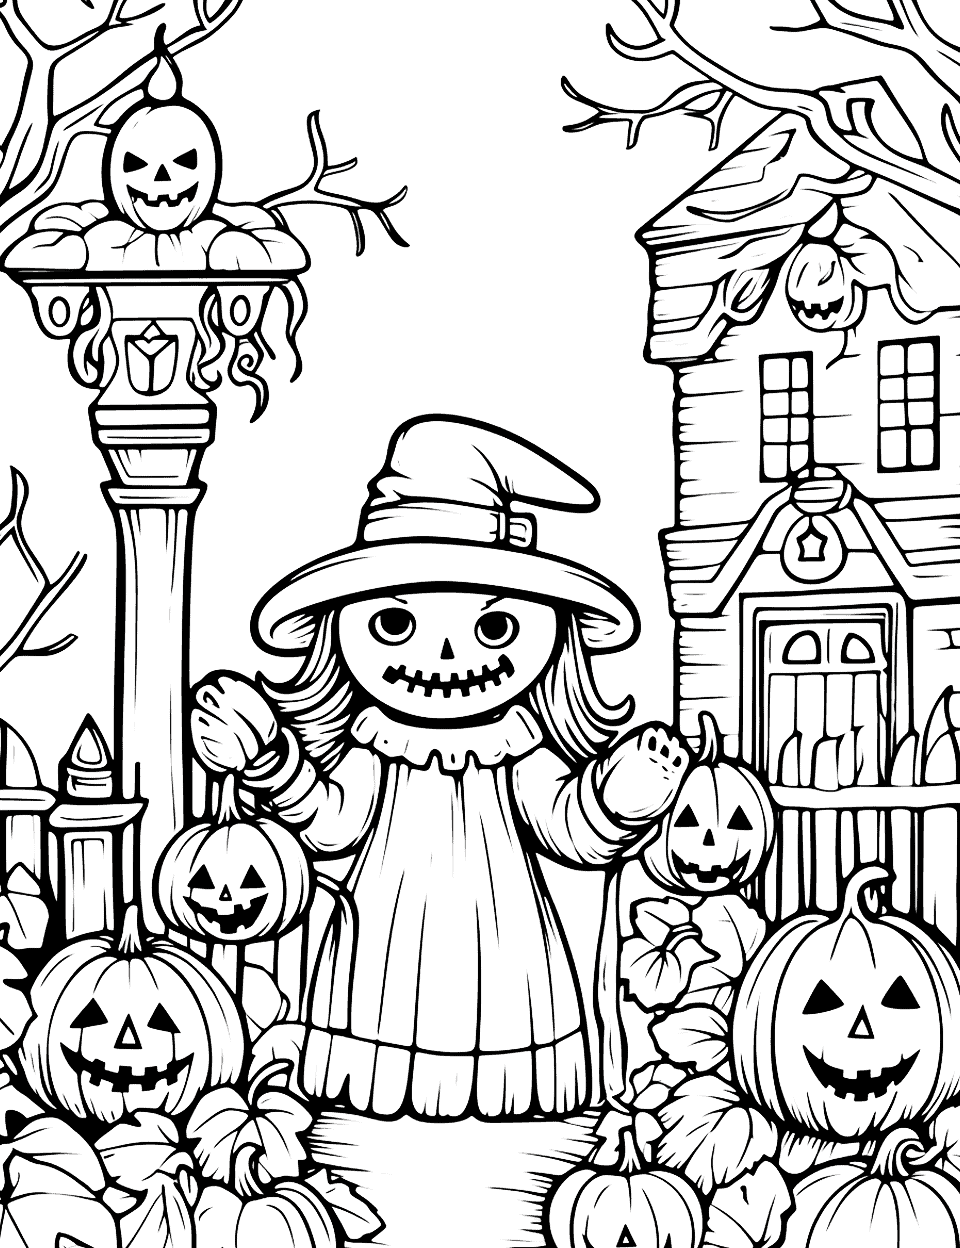 Spooky Town Square Halloween Coloring Page - A detailed scene of a town square decorated for Halloween, with townsfolk in costumes.